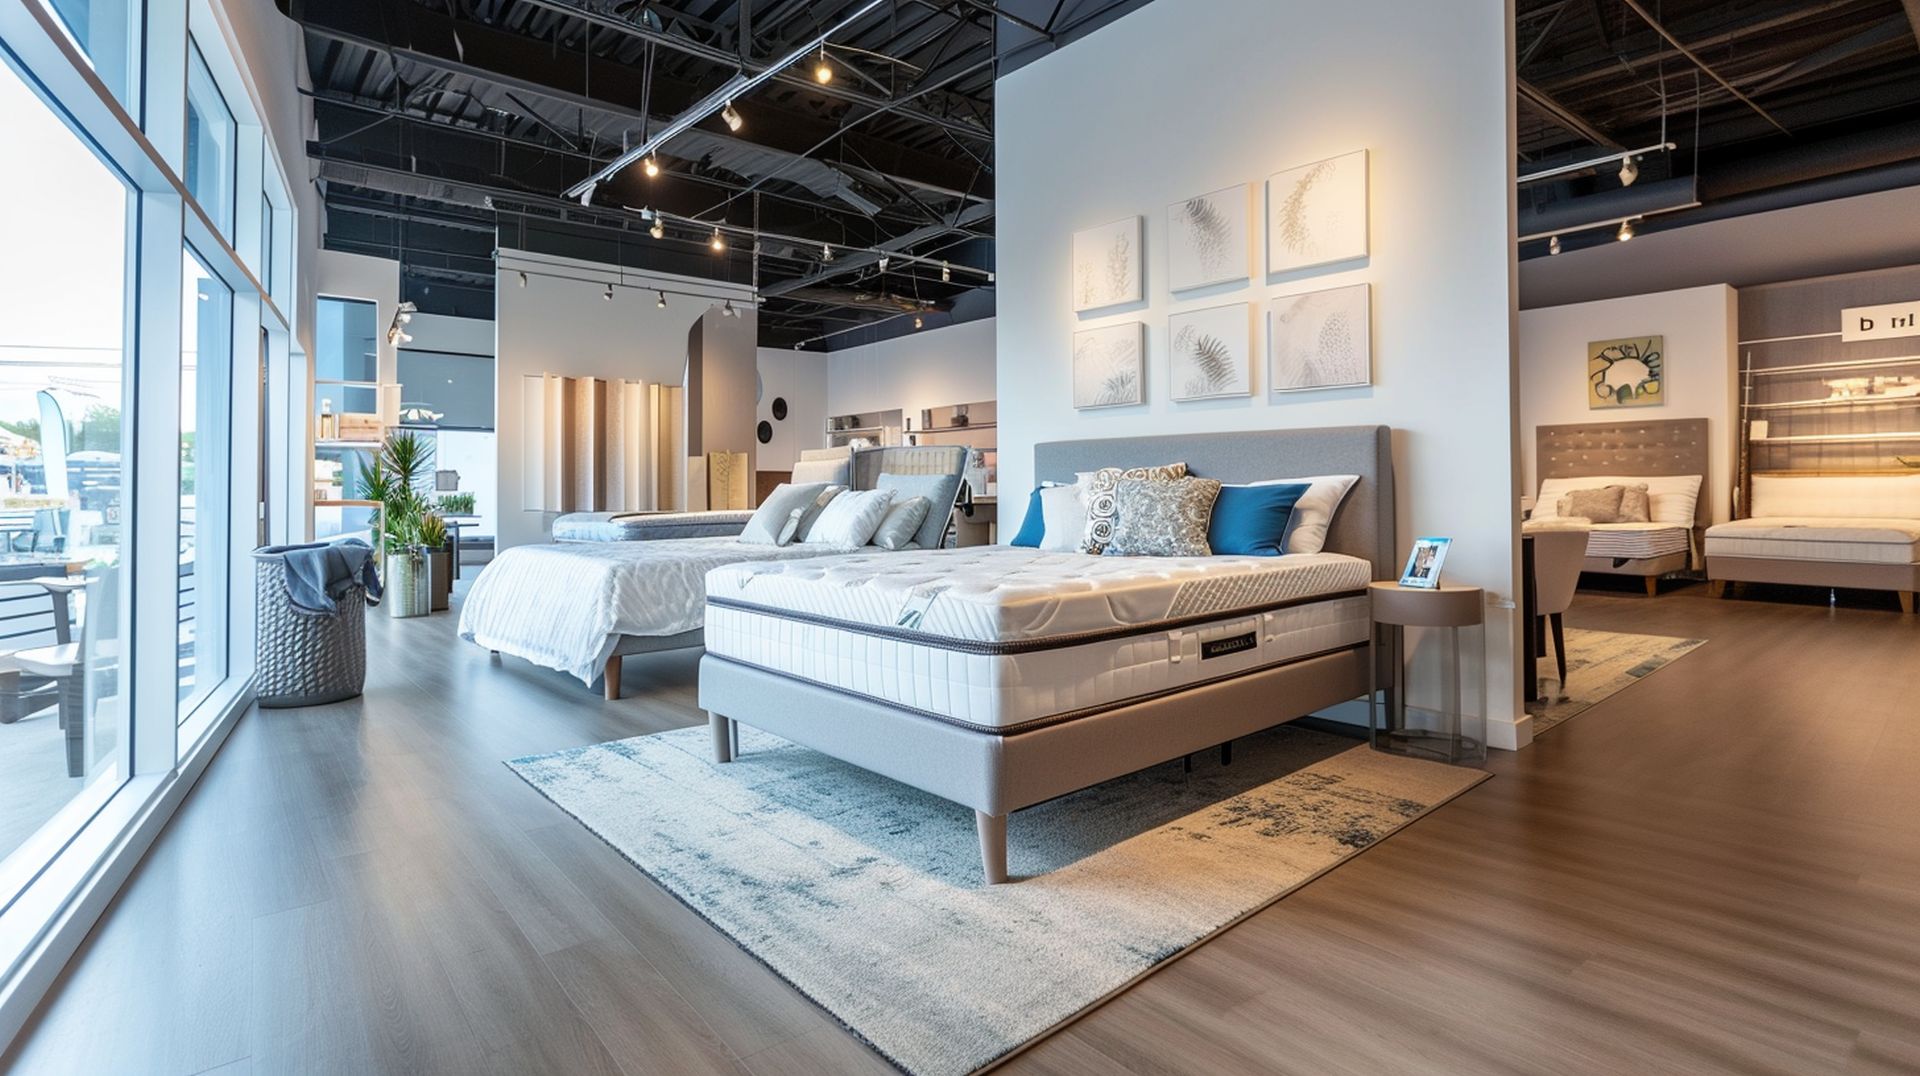 Local Longview mattress stores have the best prices, sales, and deals if you're looking for a new mattress in Longview